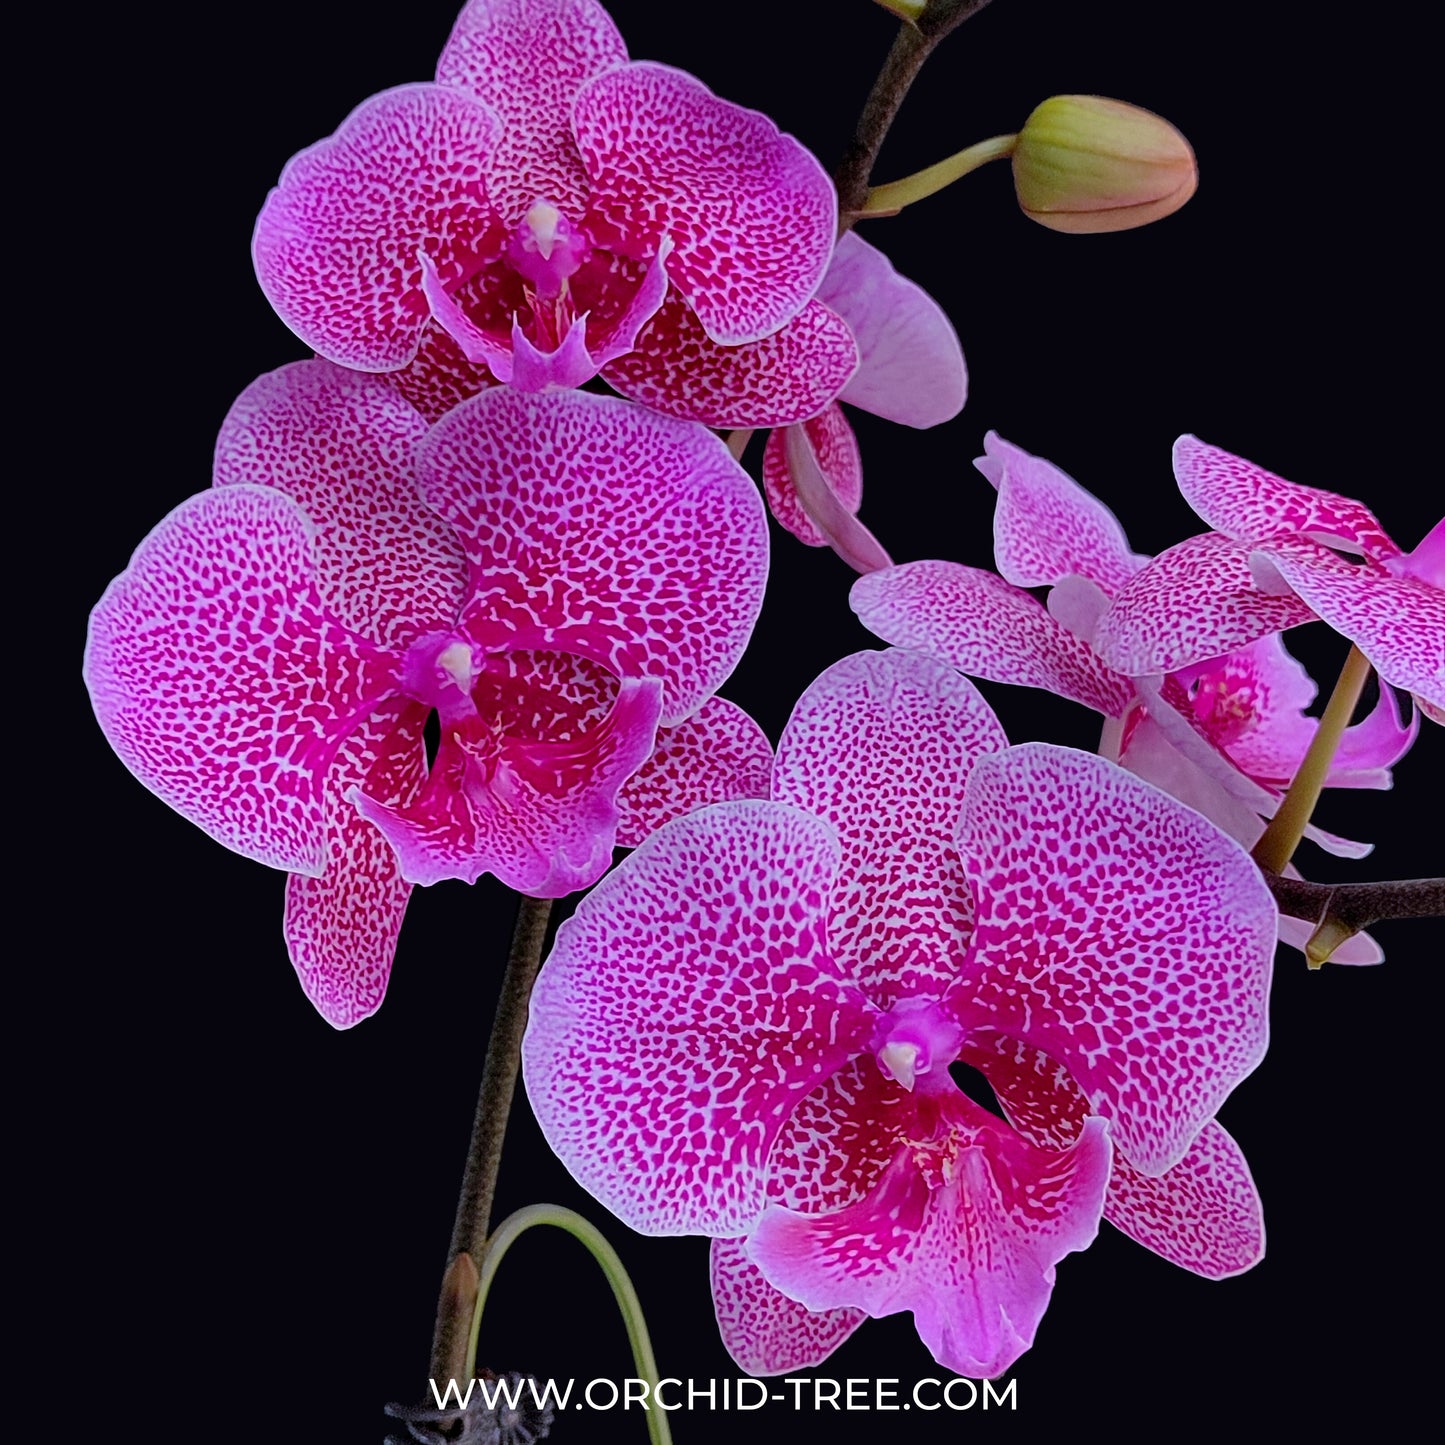 Phalaenopsis Shu Long First Kiss - FF - Buy Orchids Plants Online by Orchid-Tree.com